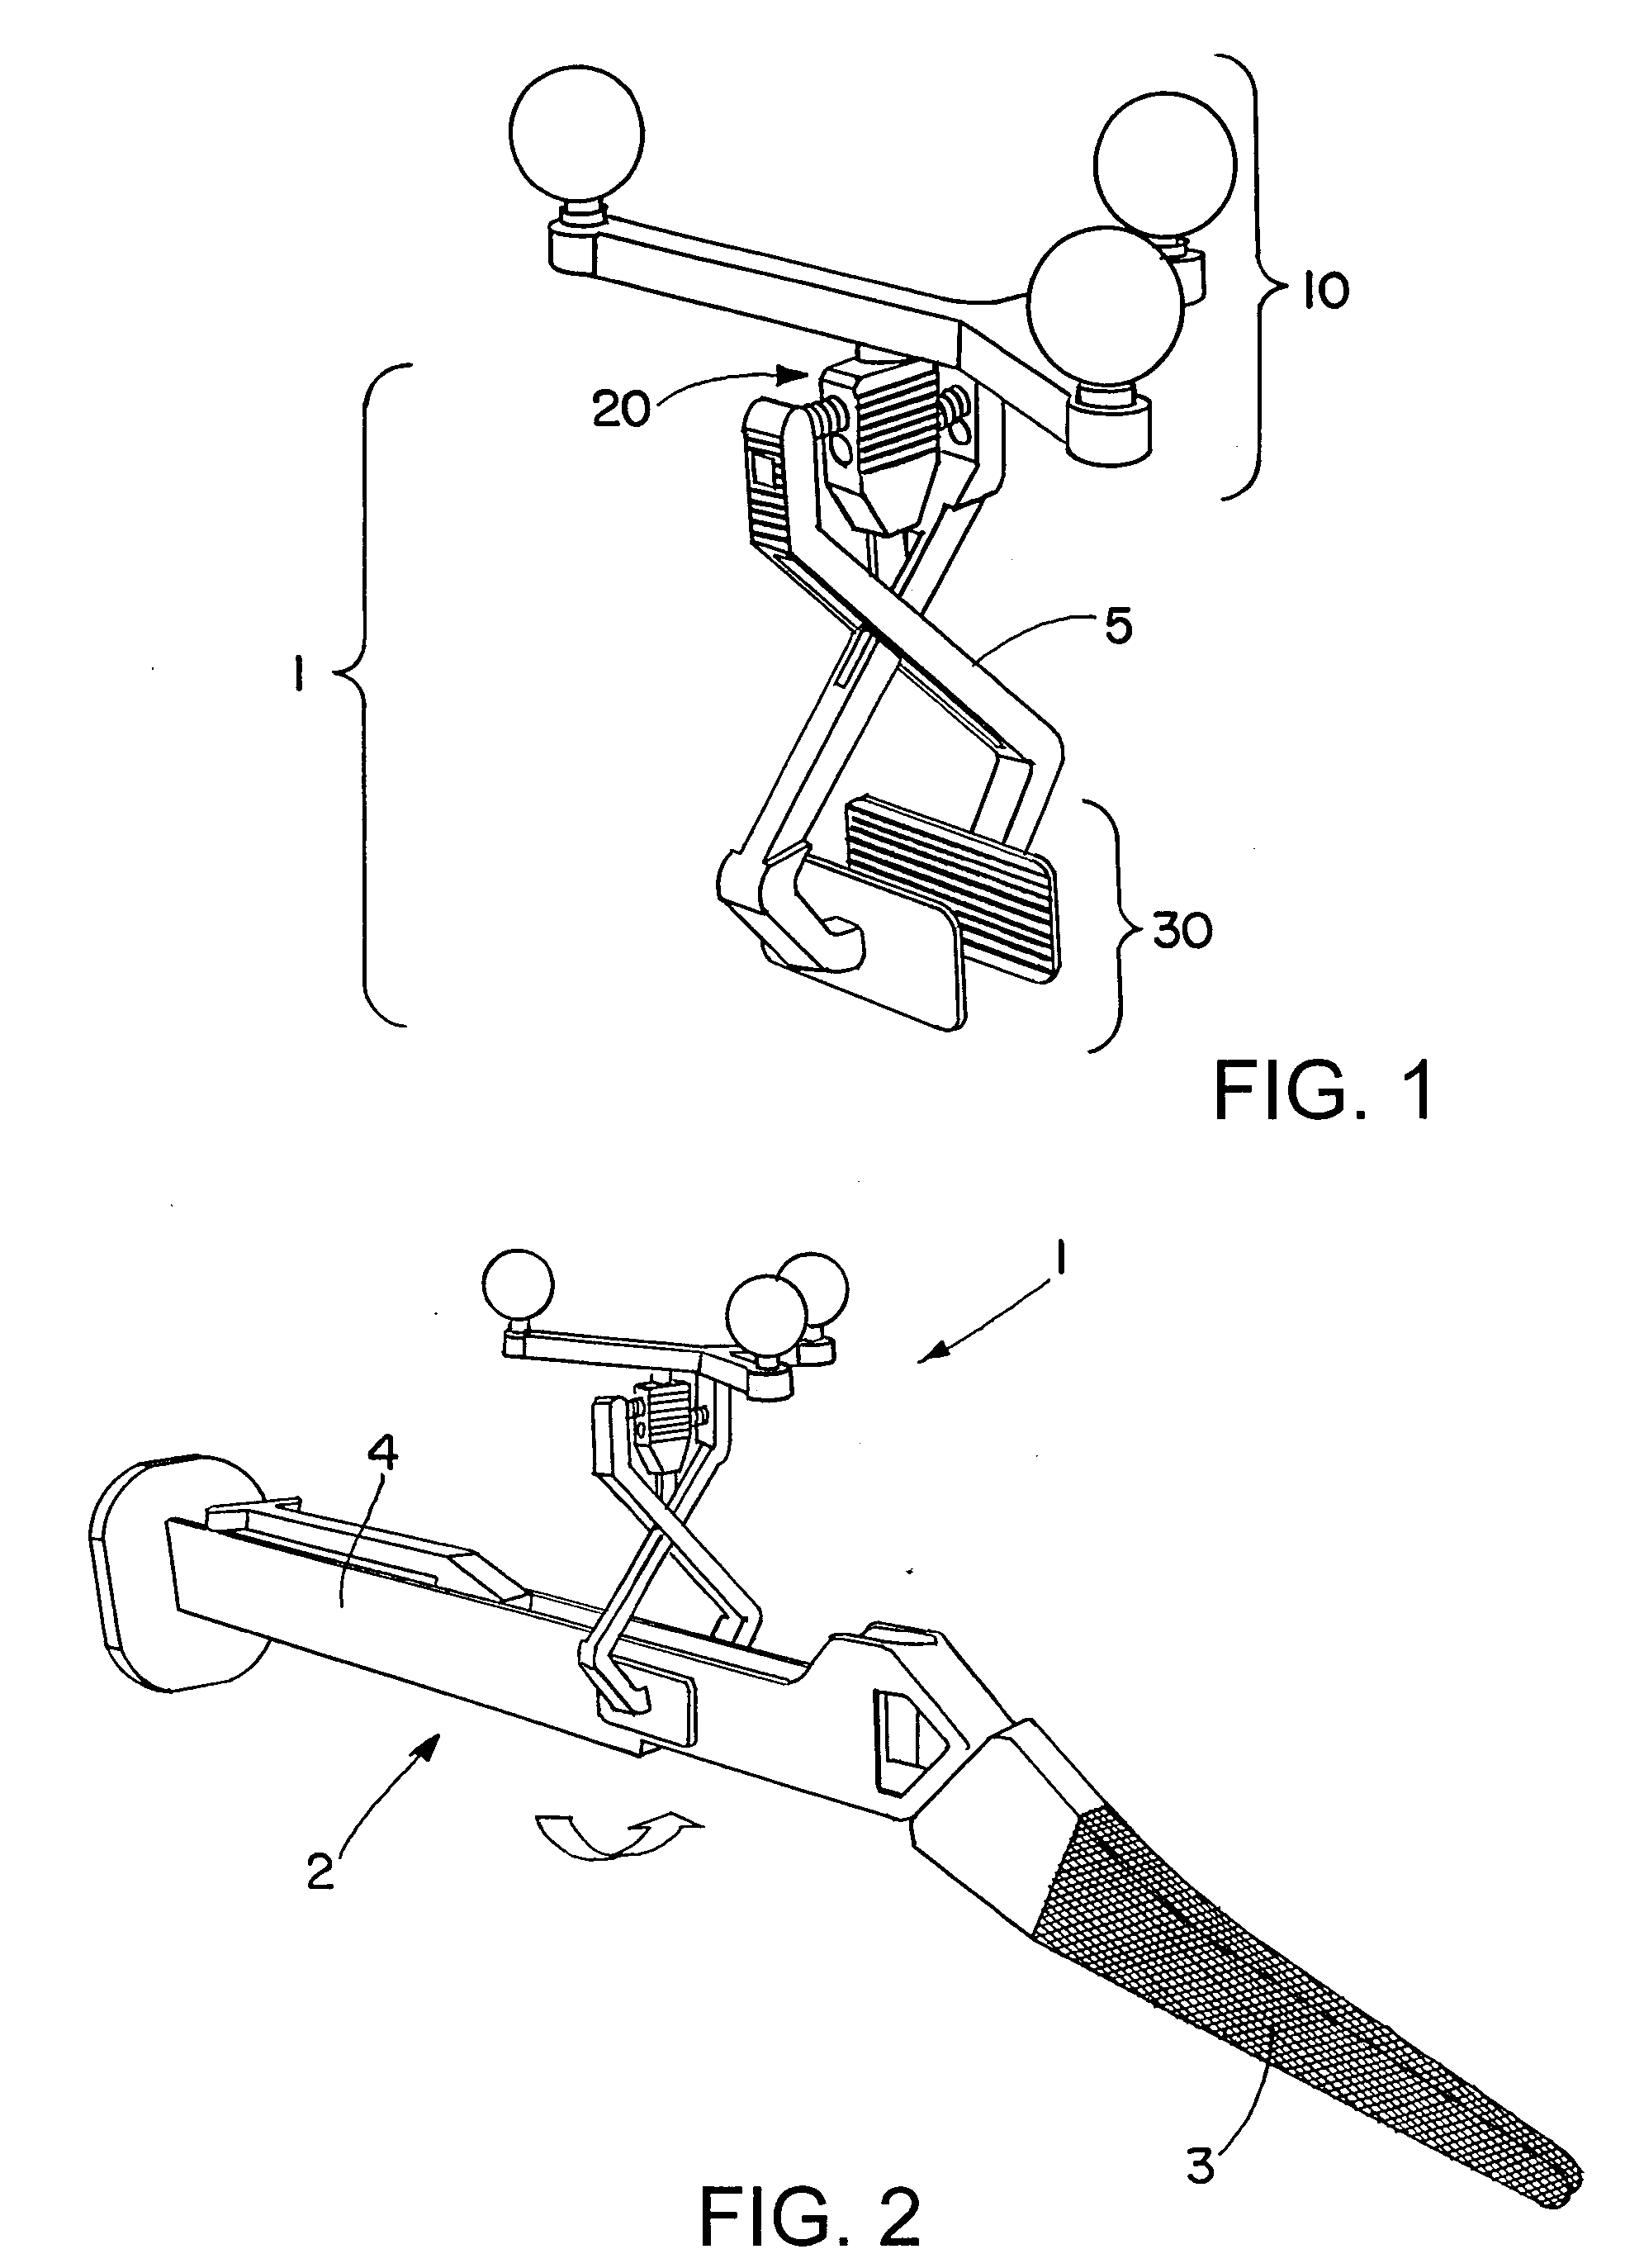 Adaptor for attaching a reference array to a medical instrument having a functional direction or plane